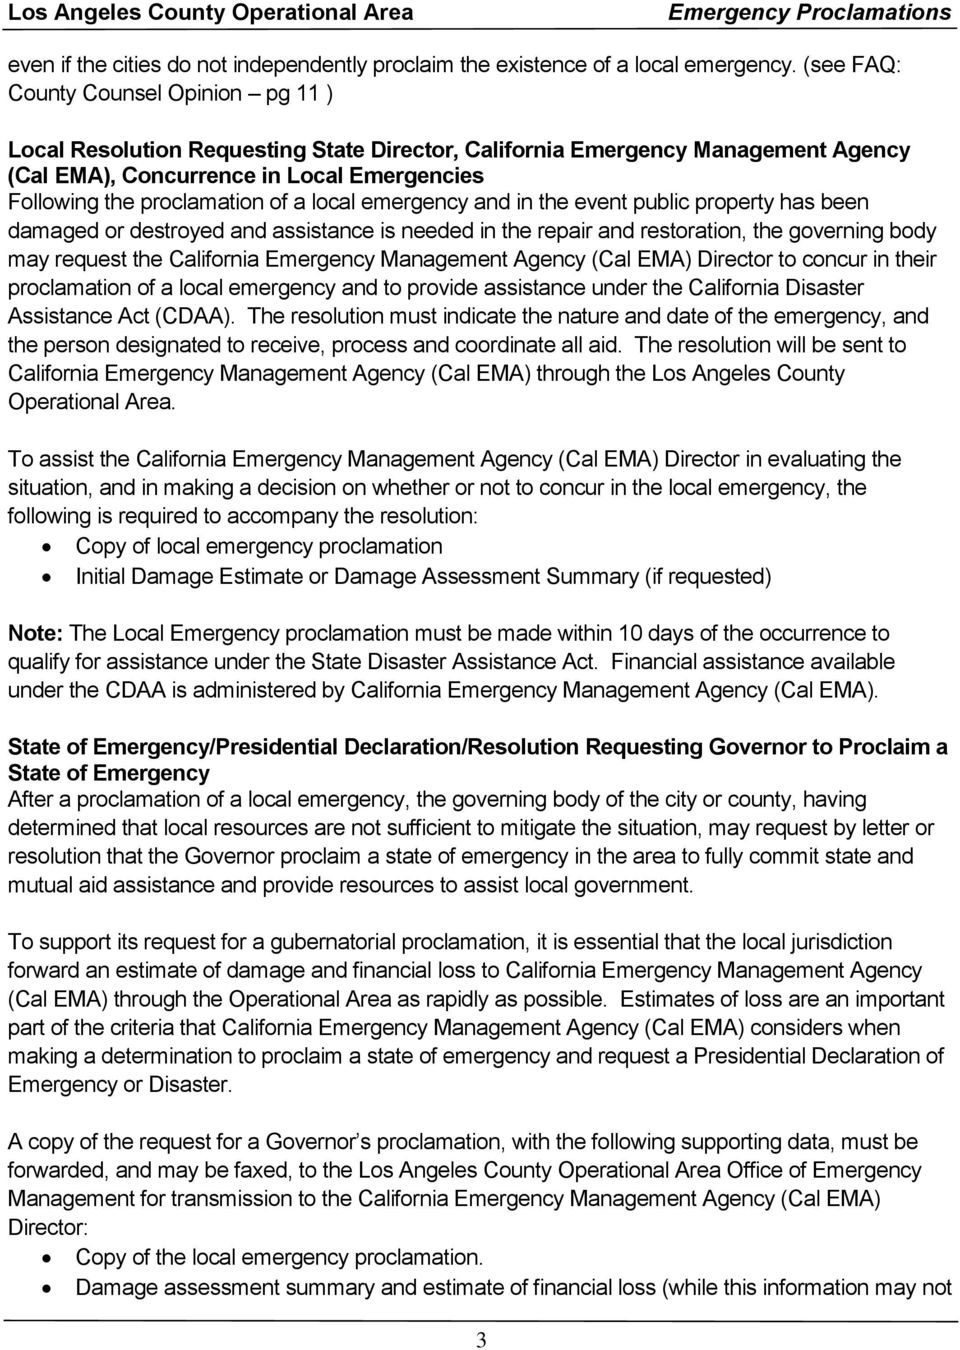 local emergency and in the event public property has been damaged or destroyed and assistance is needed in the repair and restoration, the governing body may request the California Emergency